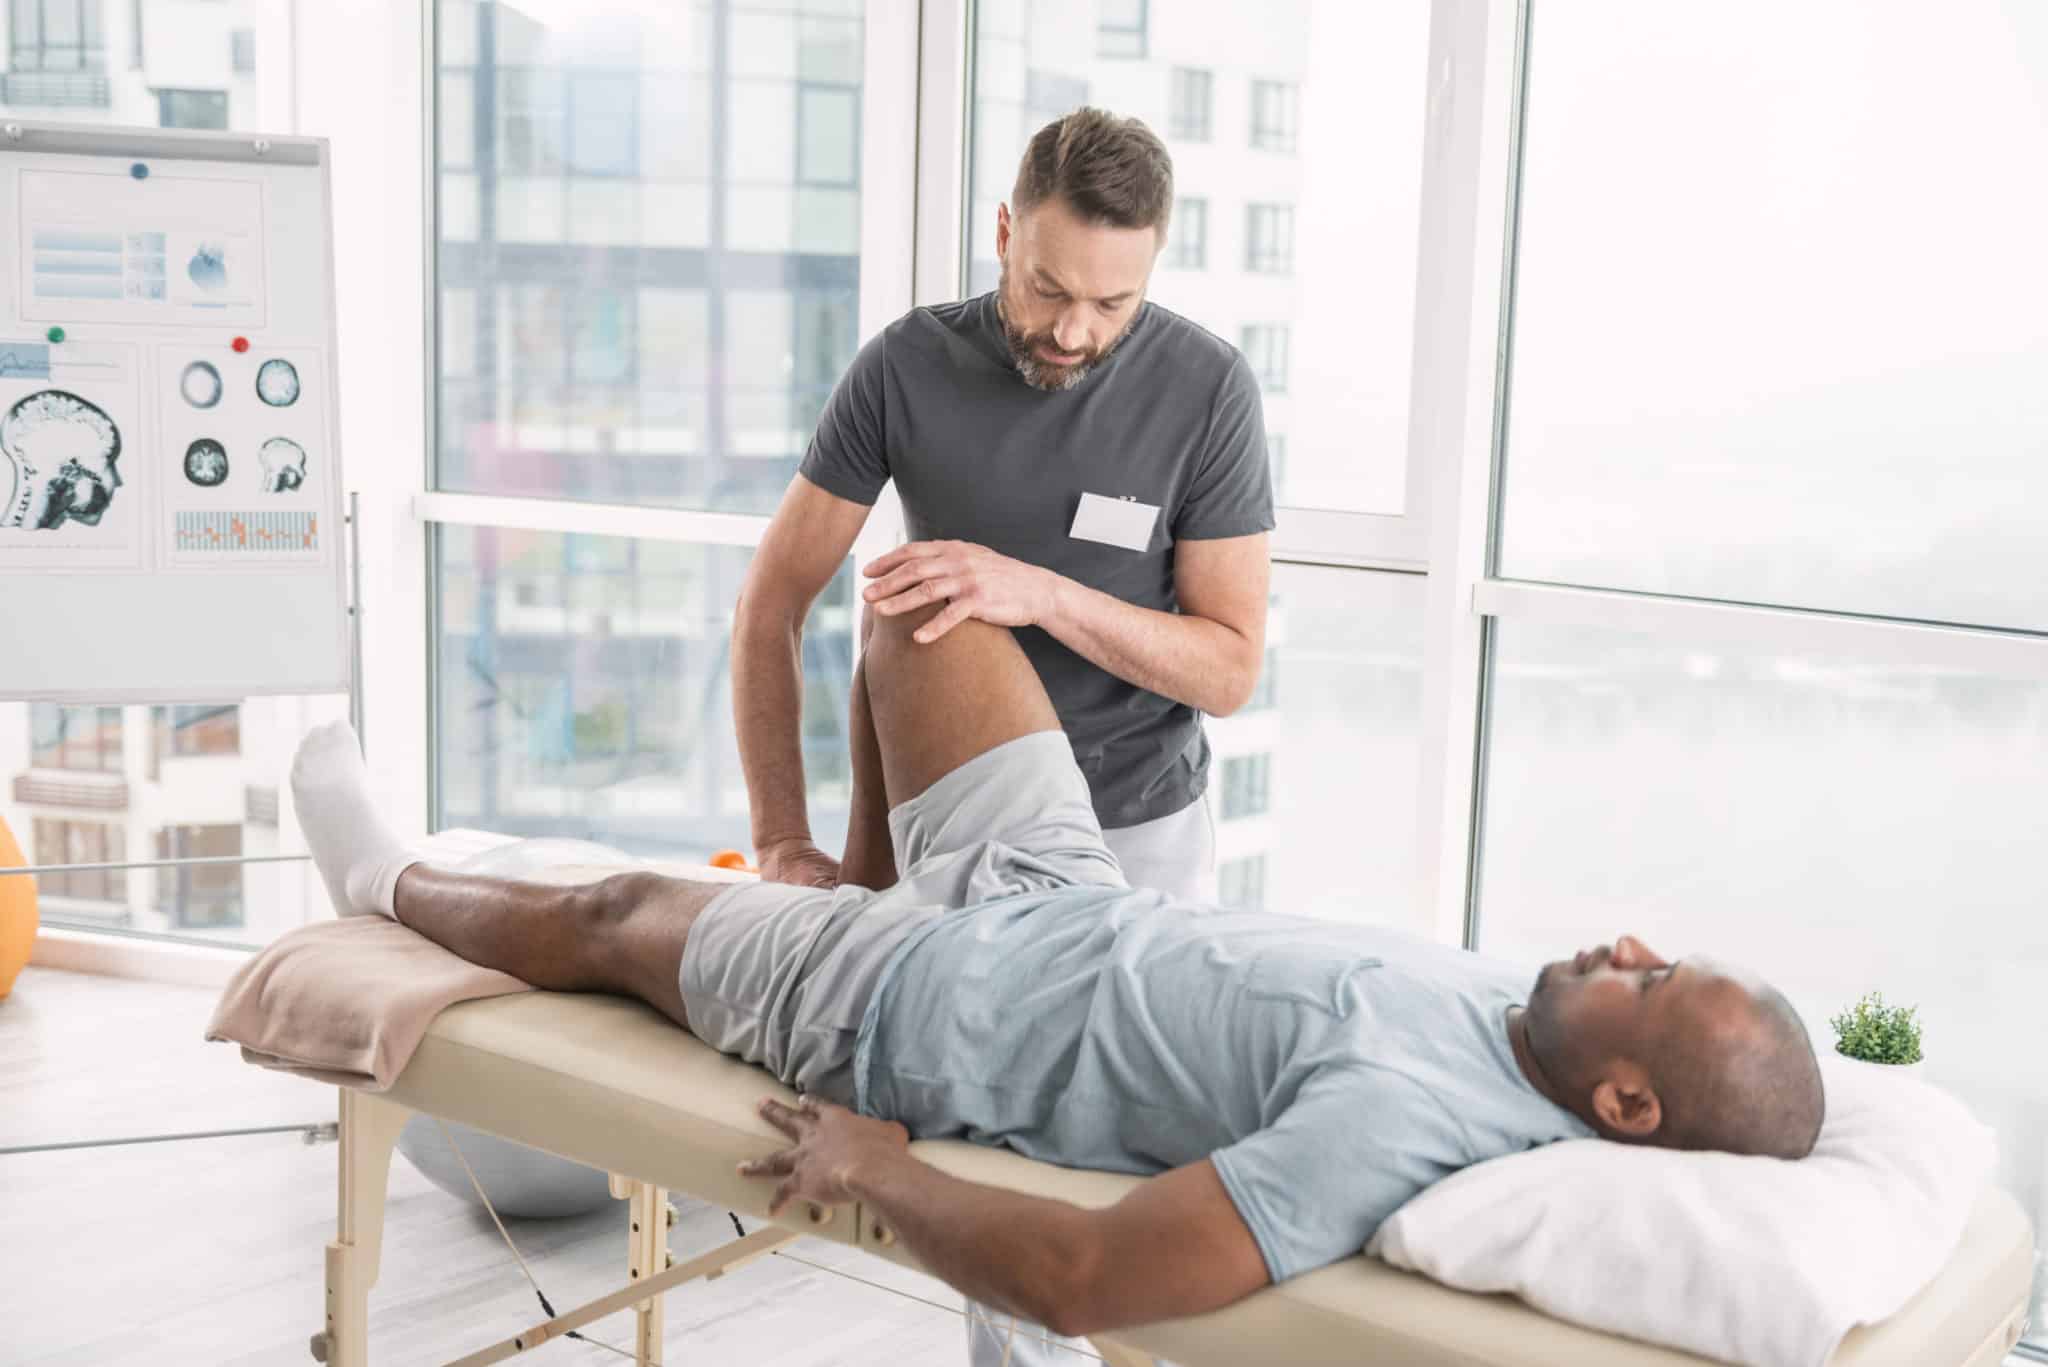 Demand for Physical Therapists continues to rise